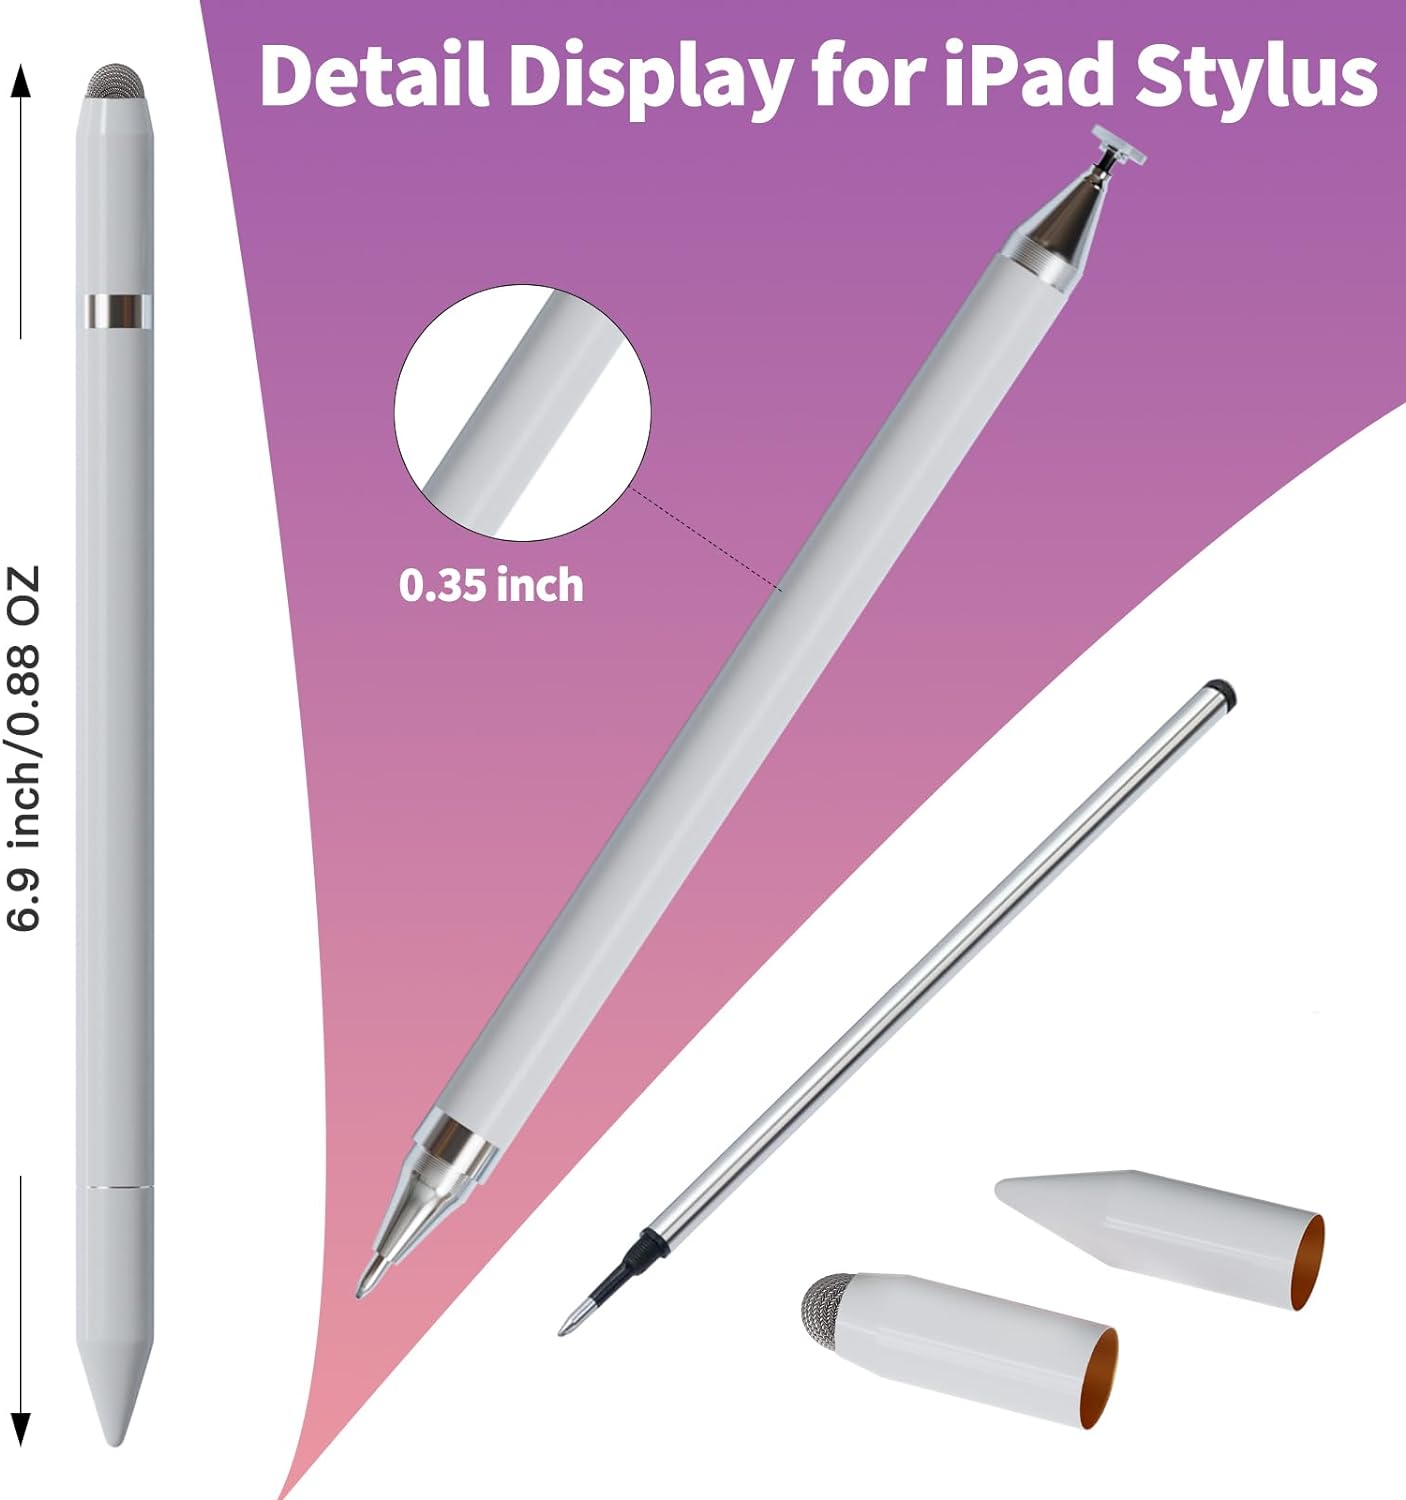 Stylus Pens for Touch Screens, Black Ballpoint Pen with Stylus Tip, 3 in 1 Stylus Pen for iPhone/iPad/Tablet/Android/Microsoft/Surface, Universal Stylus Compatible with All Touch Screens (Rose Gold)